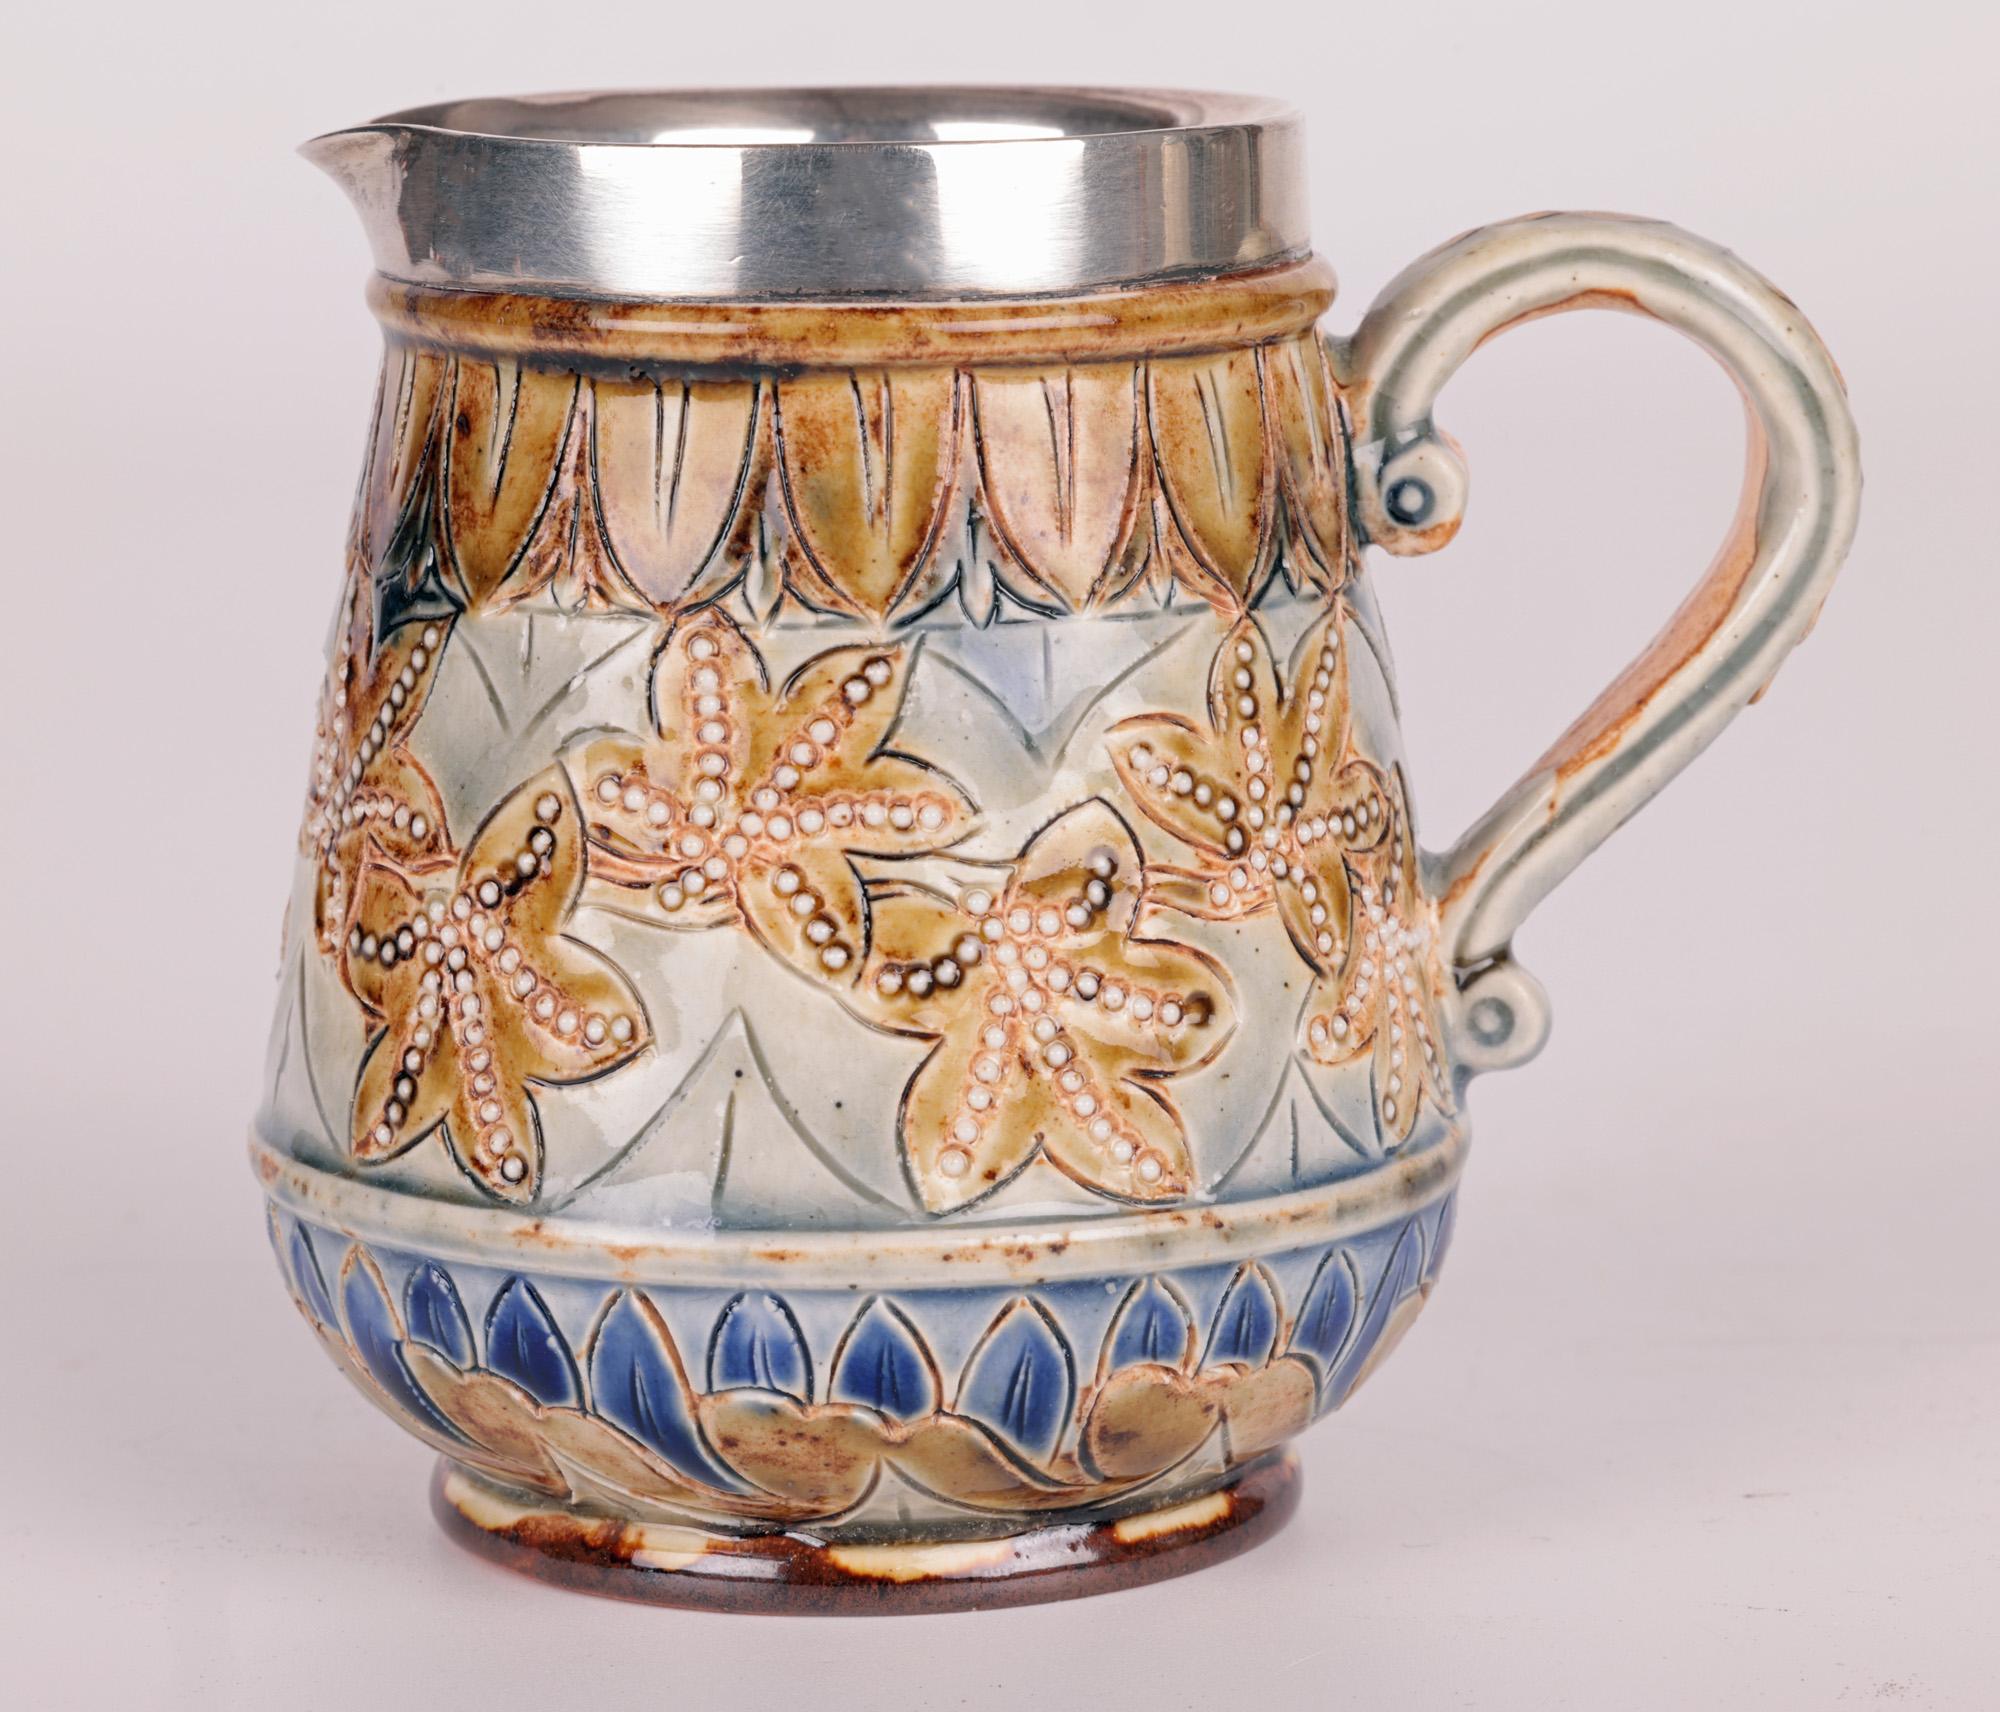 Glazed Doulton Lambeth Silver Mounted Cream Jug by Francis E Lee, 1877 For Sale